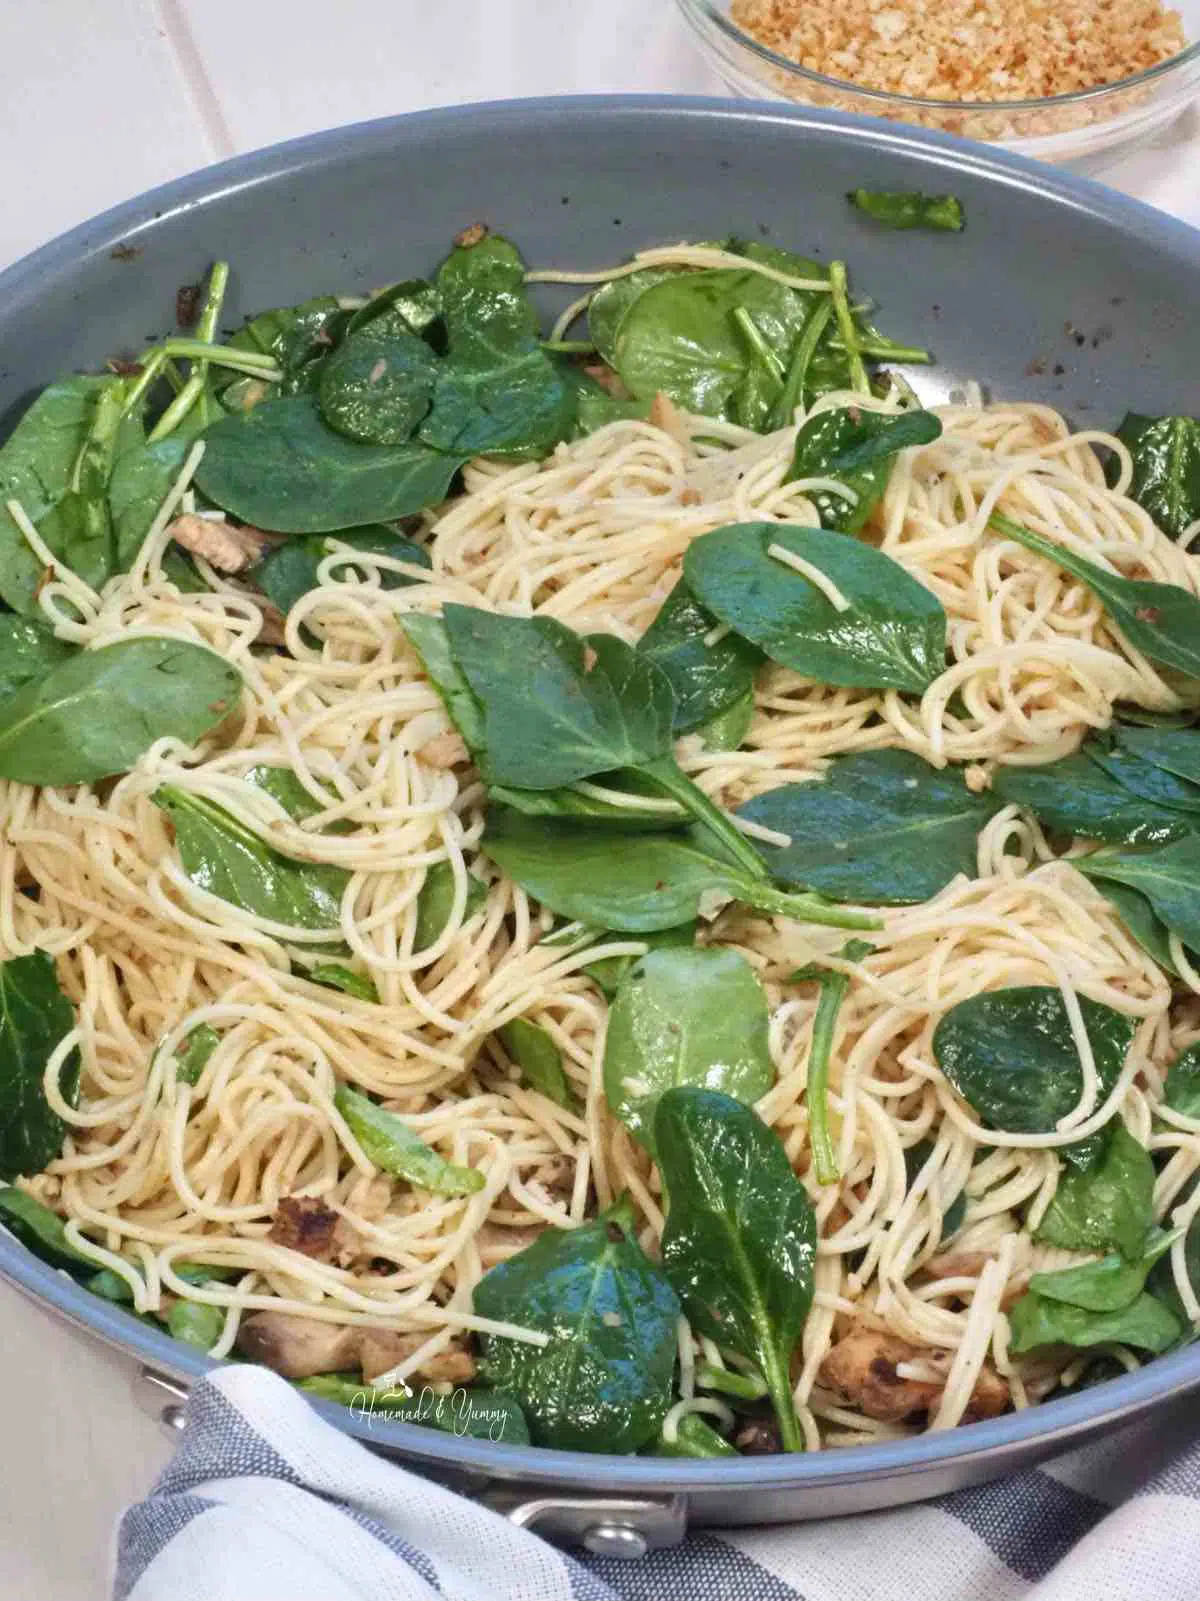 Spaghetti with sardines, mushrooms and spinach in a pan.